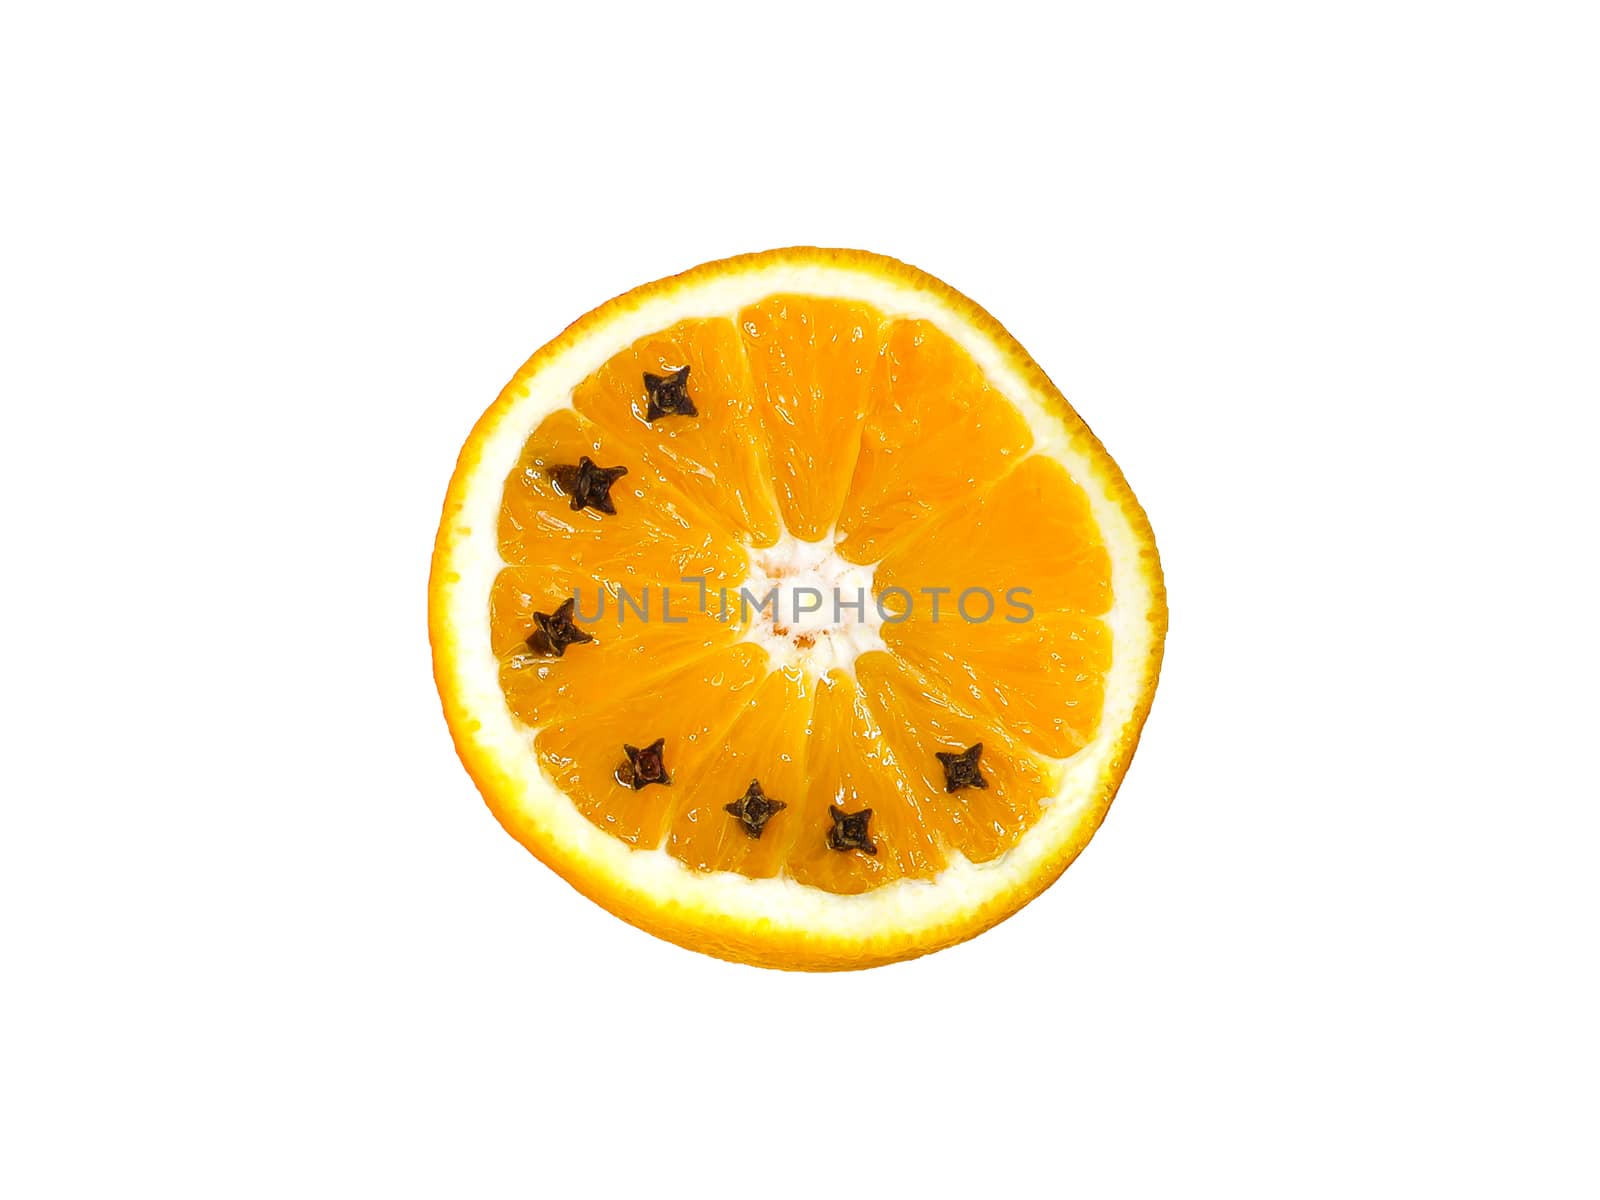 a slice of sliced navel orange with cloves, top view, isolated on white background